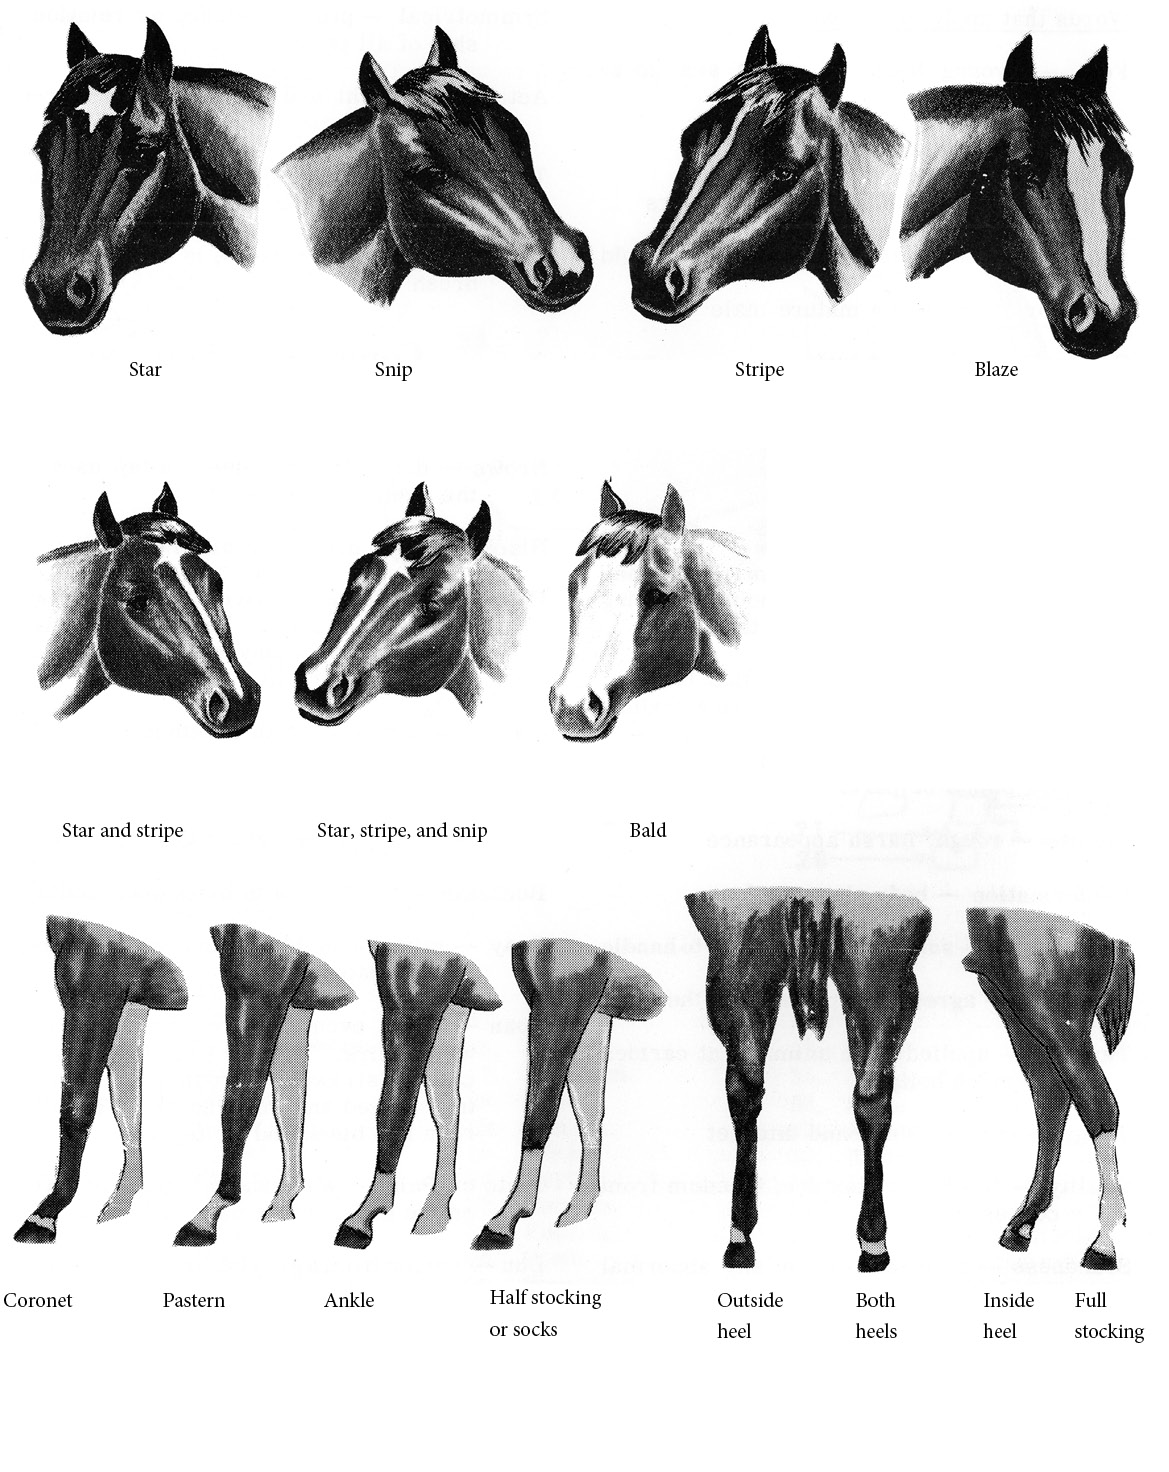 Drawings of horse heads show different color markings. Star is a white star shape on the forehead just above the eyes. Snip is a white splotch between the nostrils. Stripe is a thin, white stripe that goes from the top of the forehead to between the nostrils. Blaze is a thick, white stripe from the top of the forehead to between the nostrils. Star and stripe is a white star on the forehead with a thin, white stripe coming down to between the nostrils. Star, stripe, and snip is the same as star and stripe, but the end of the stripe between the nostrils has a white blotch. Bald is white hair on all of the space between the eyes, down the front of the face, and onto the nostrils.Drawings of horse legs show different markings. Coronet is a thin, white band just above the foot. In pastern, the band extends to just under the ankle. In ankle, the white band goes up over the ankle. In half stocking or socks, the band goes about halfway up to the knee. Outside heel marking is a white mark on the outside of the heel; inside heel is a white mark inside the heel. Both heels is a white marking on the inside and outside of the heel. Full stocking is like half stocking, but the band extends up to the knee/calf.